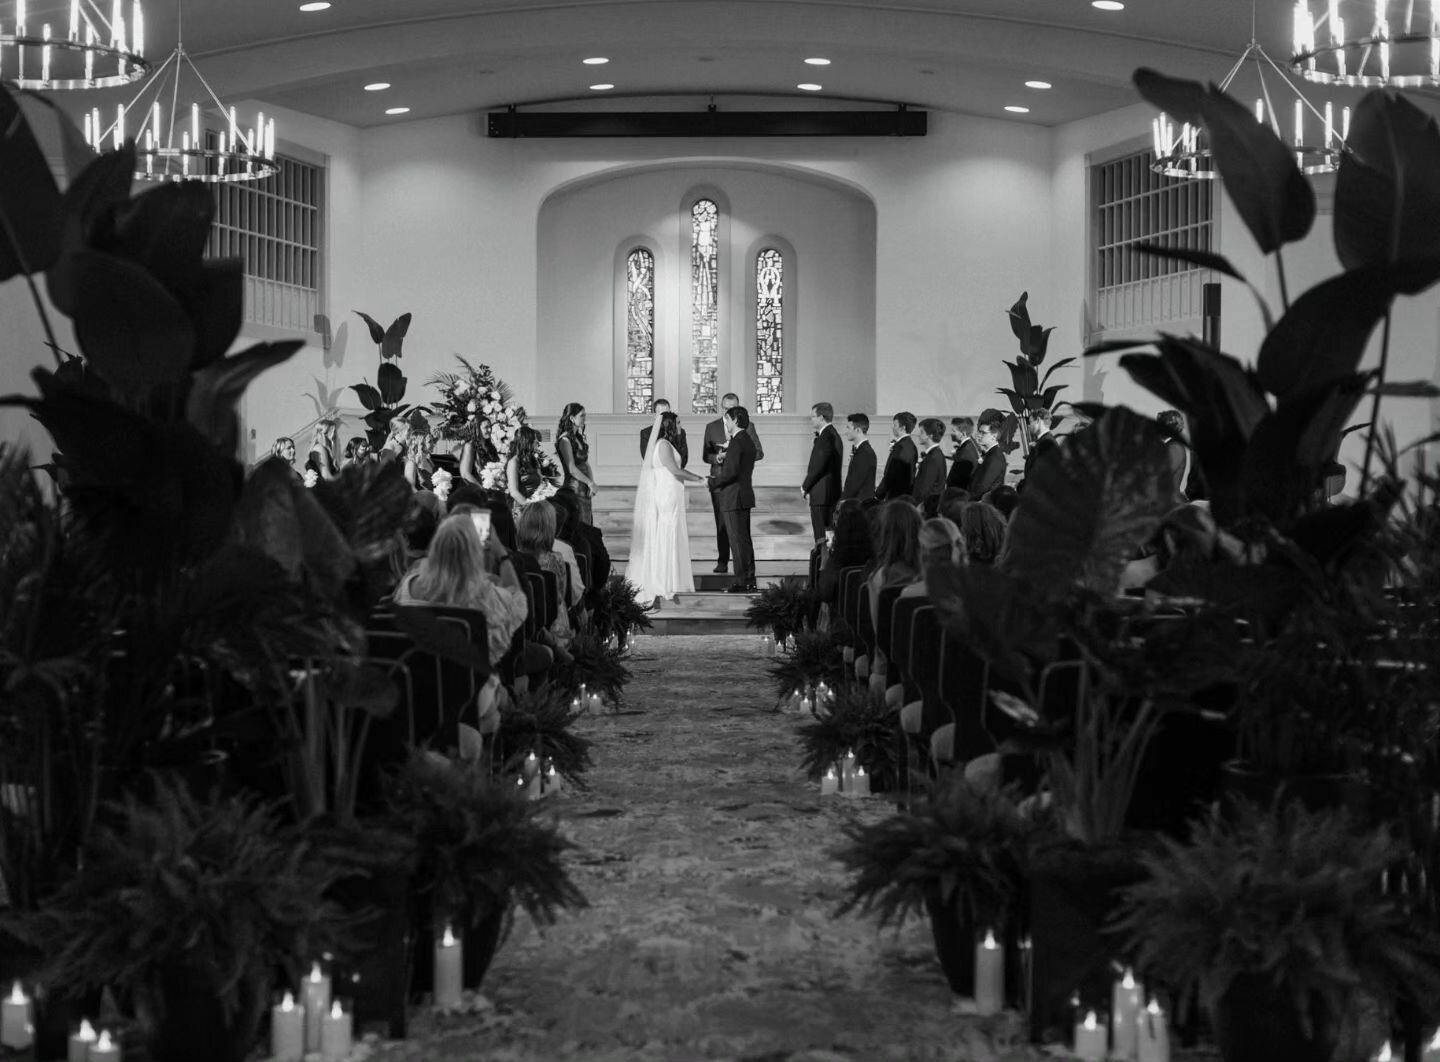 A  C L A S S I C  BE G I N N I N G

Some things never go out of style. Black and white is timeless - in photographs, in bridesmaids' dresses, in flowers and candles. And when our beautiful bride wanted her entire day to be classic and timeless, we su